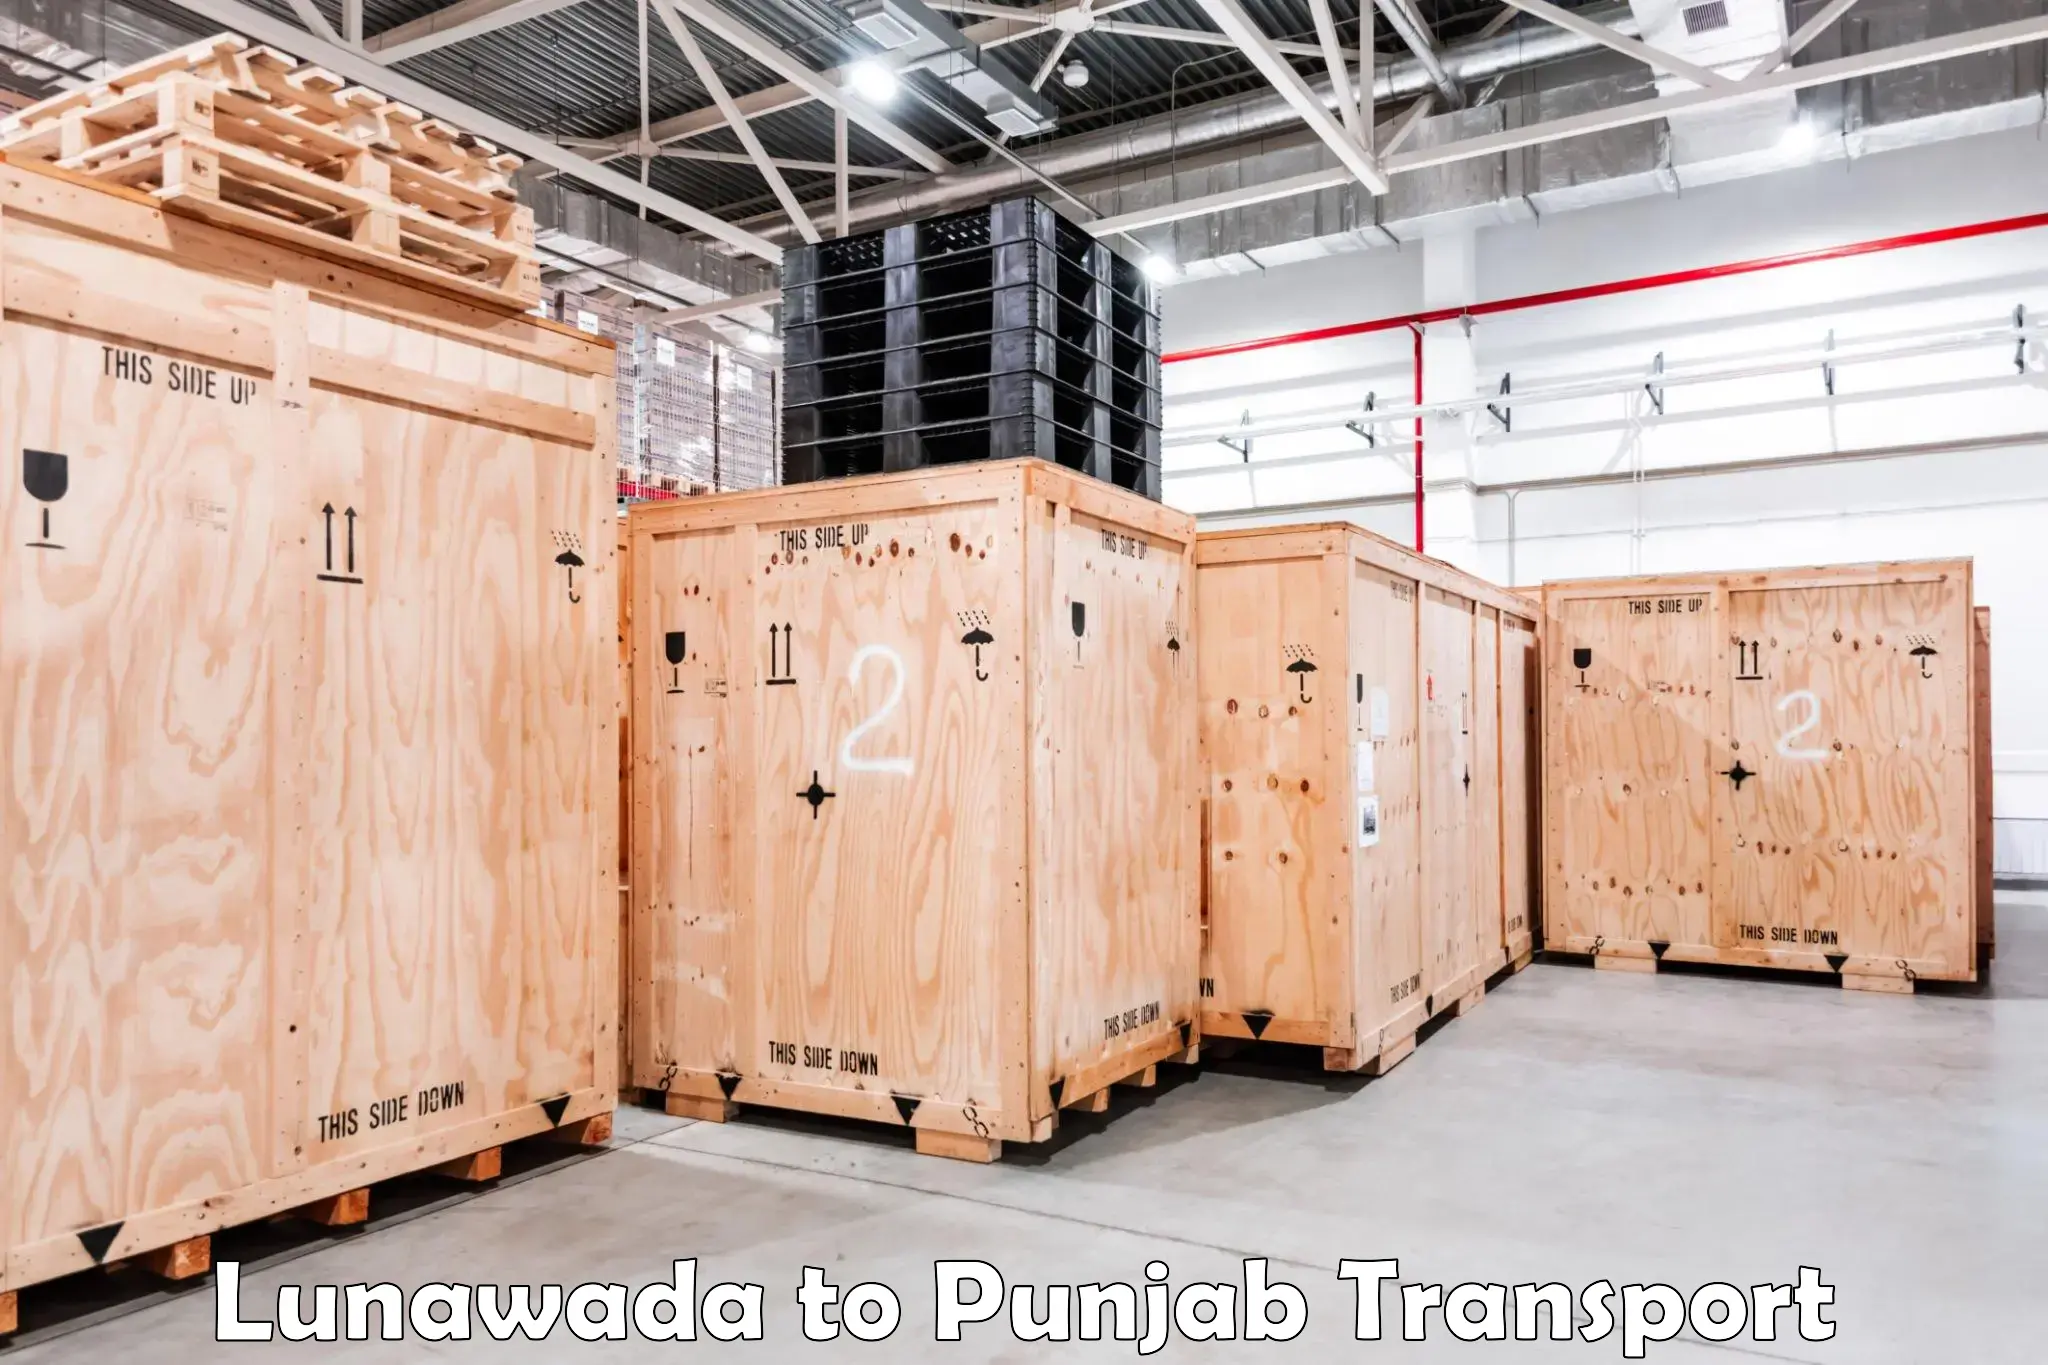 Transport bike from one state to another in Lunawada to Punjab